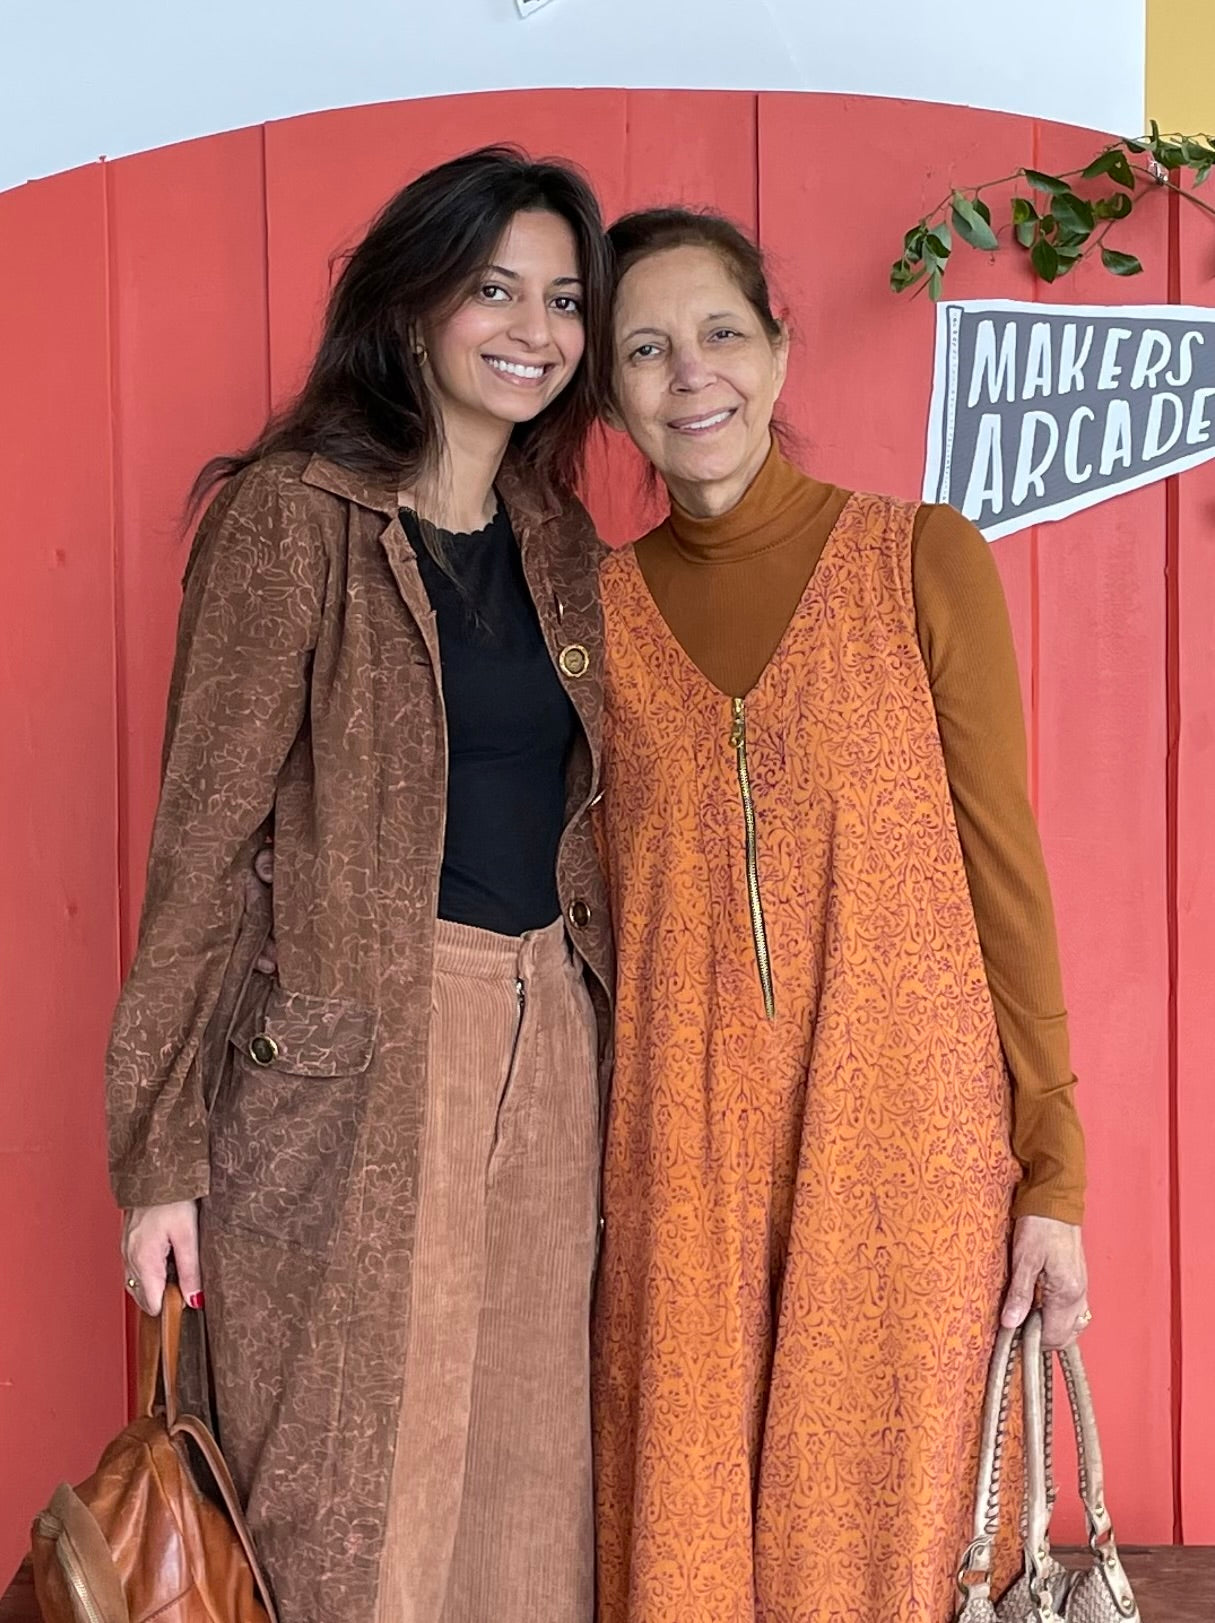 Nargis and her mother standing in front of Maker's Arcade sign